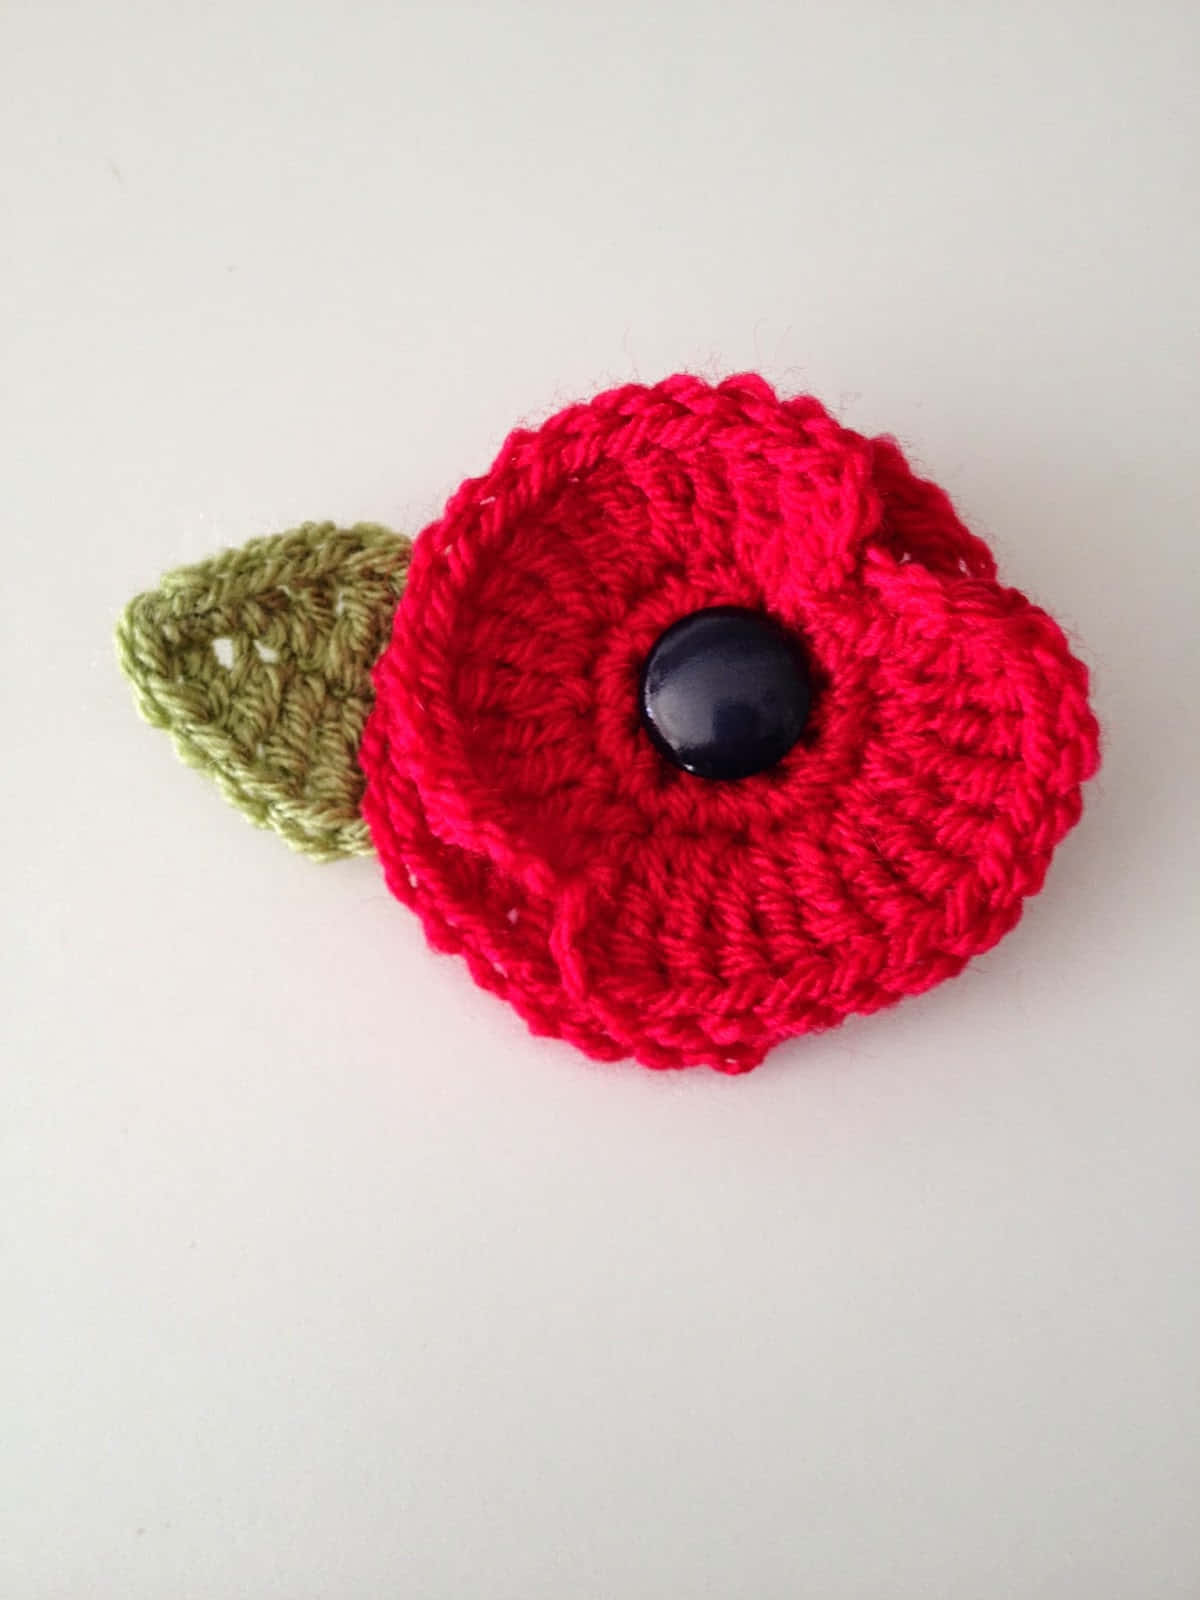 Learn crochet and create different textures and patterns!